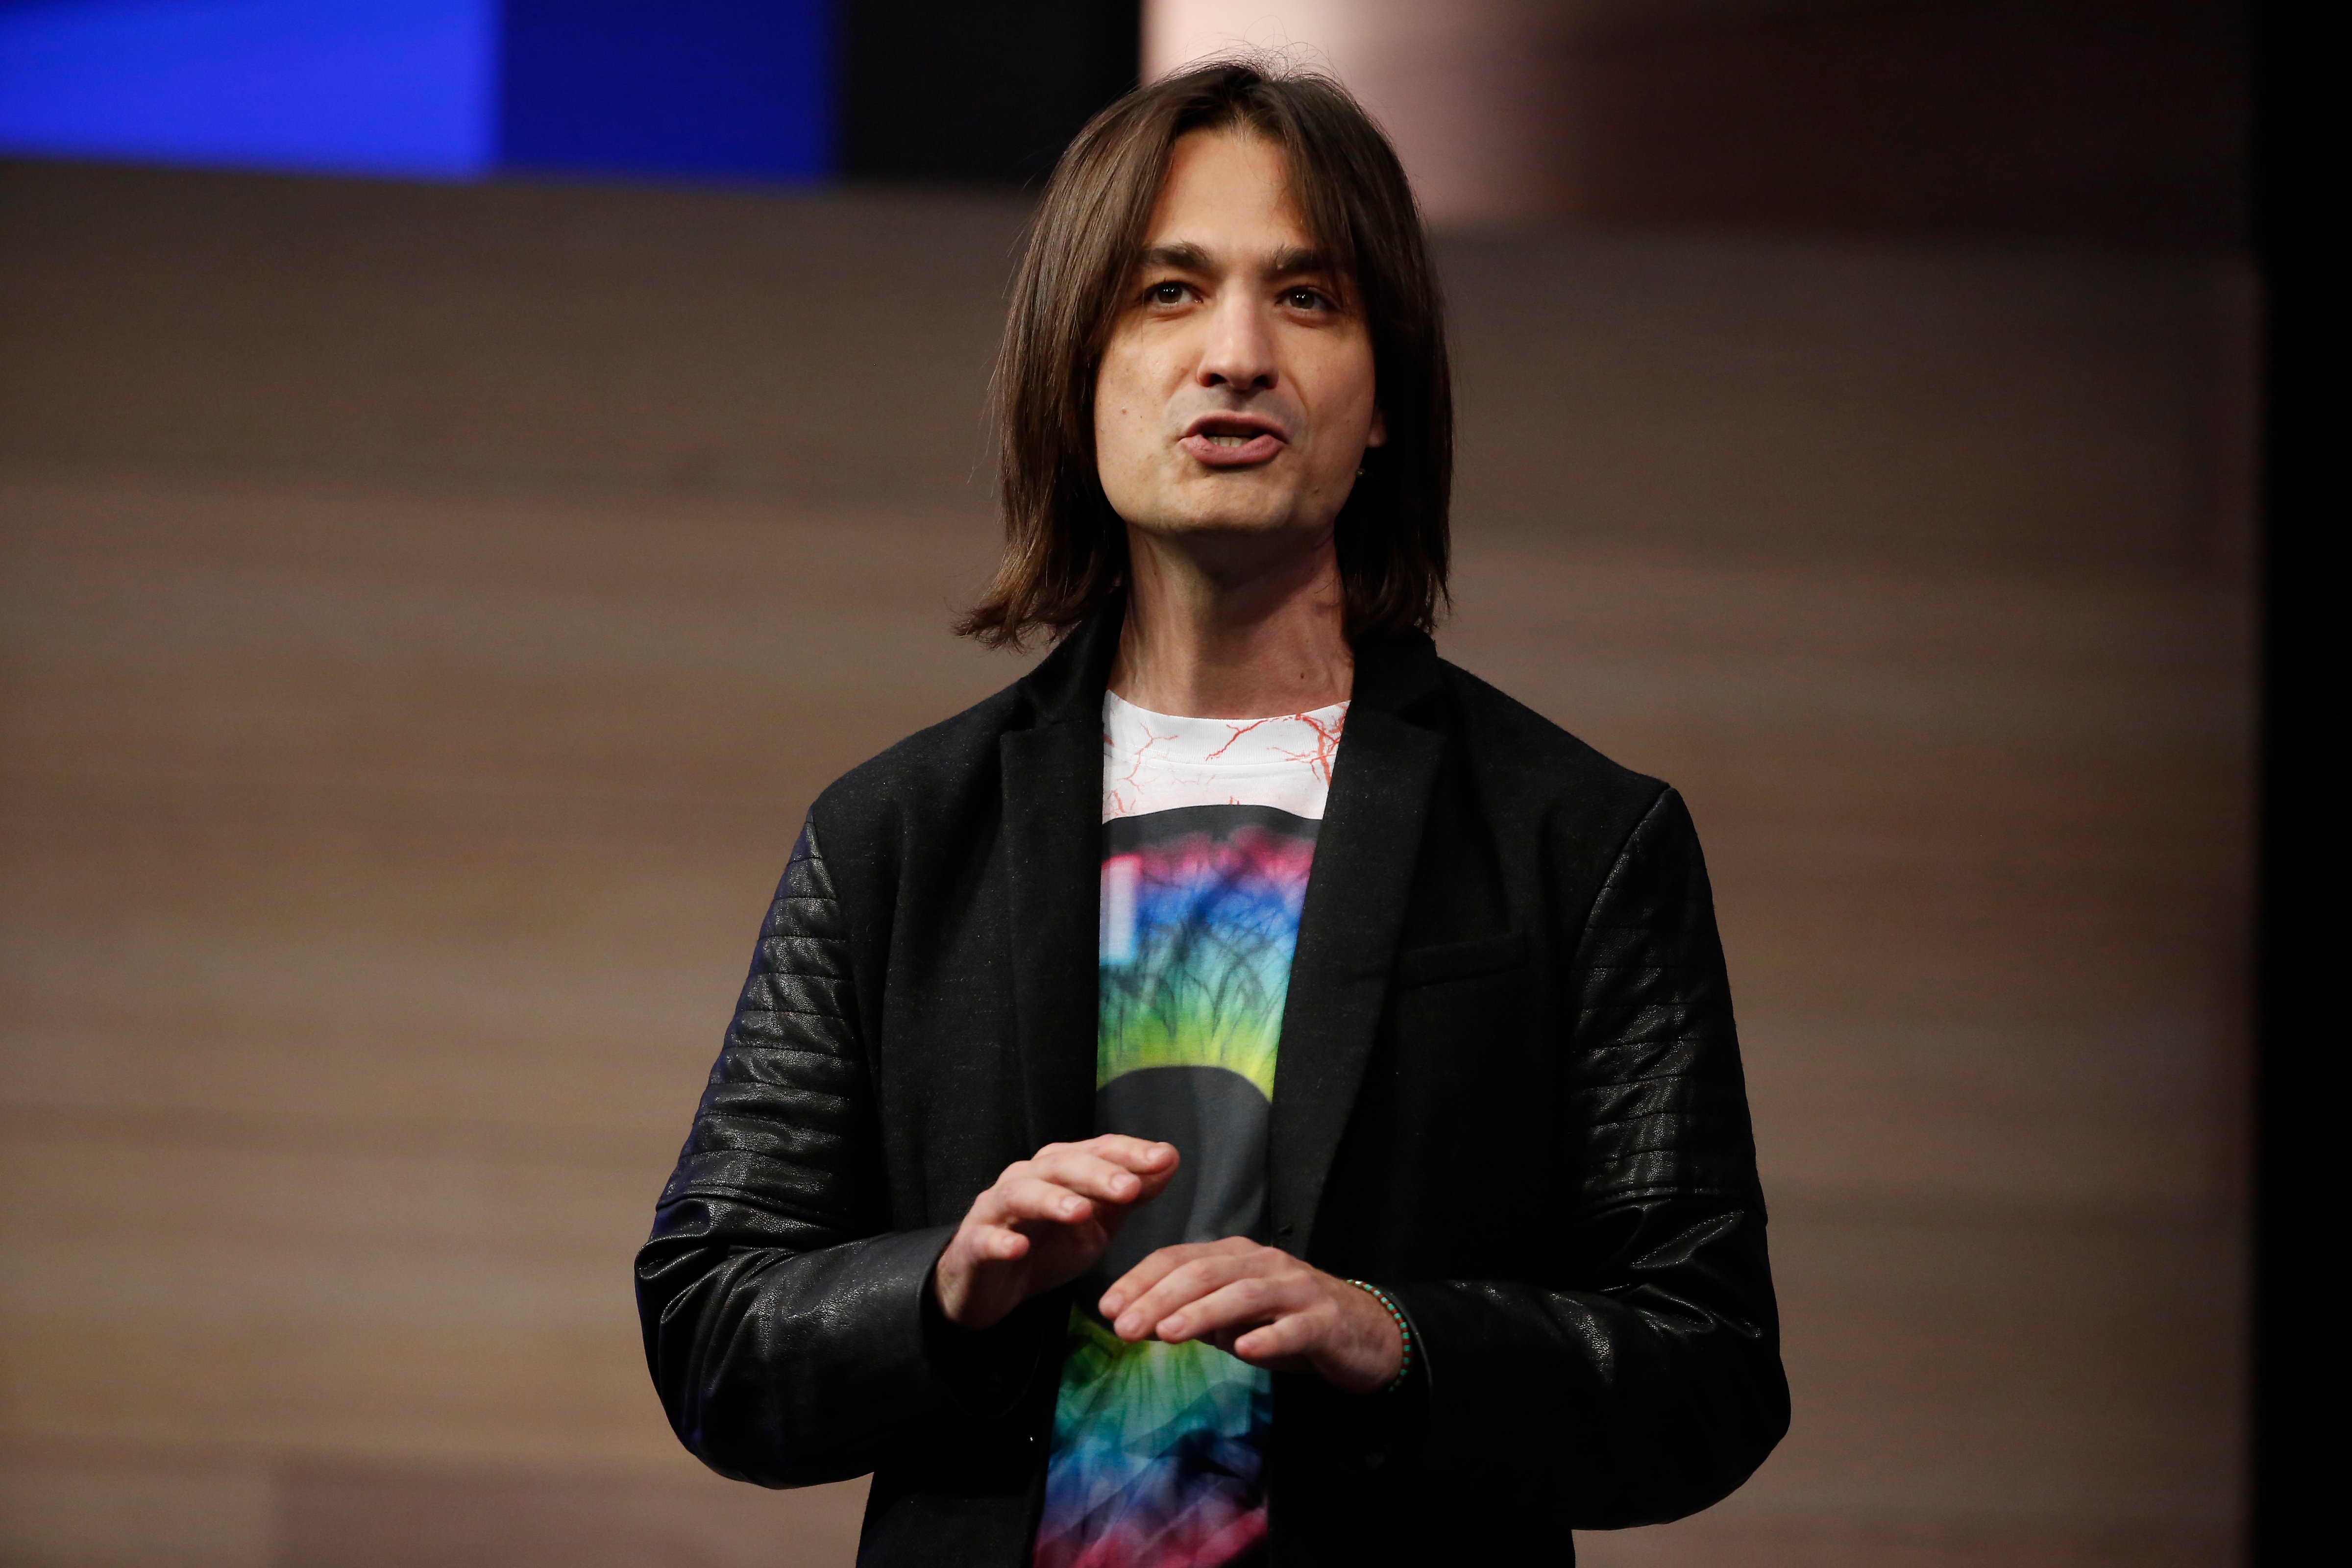 Alex Kipman, technical fellow, operating system group at Microsoft, speaks on stage during the 2015 Microsoft Build Conference on April 29, 2015 at Moscone Center in San Francisco, California. (Stephen Lam—Getty Images)